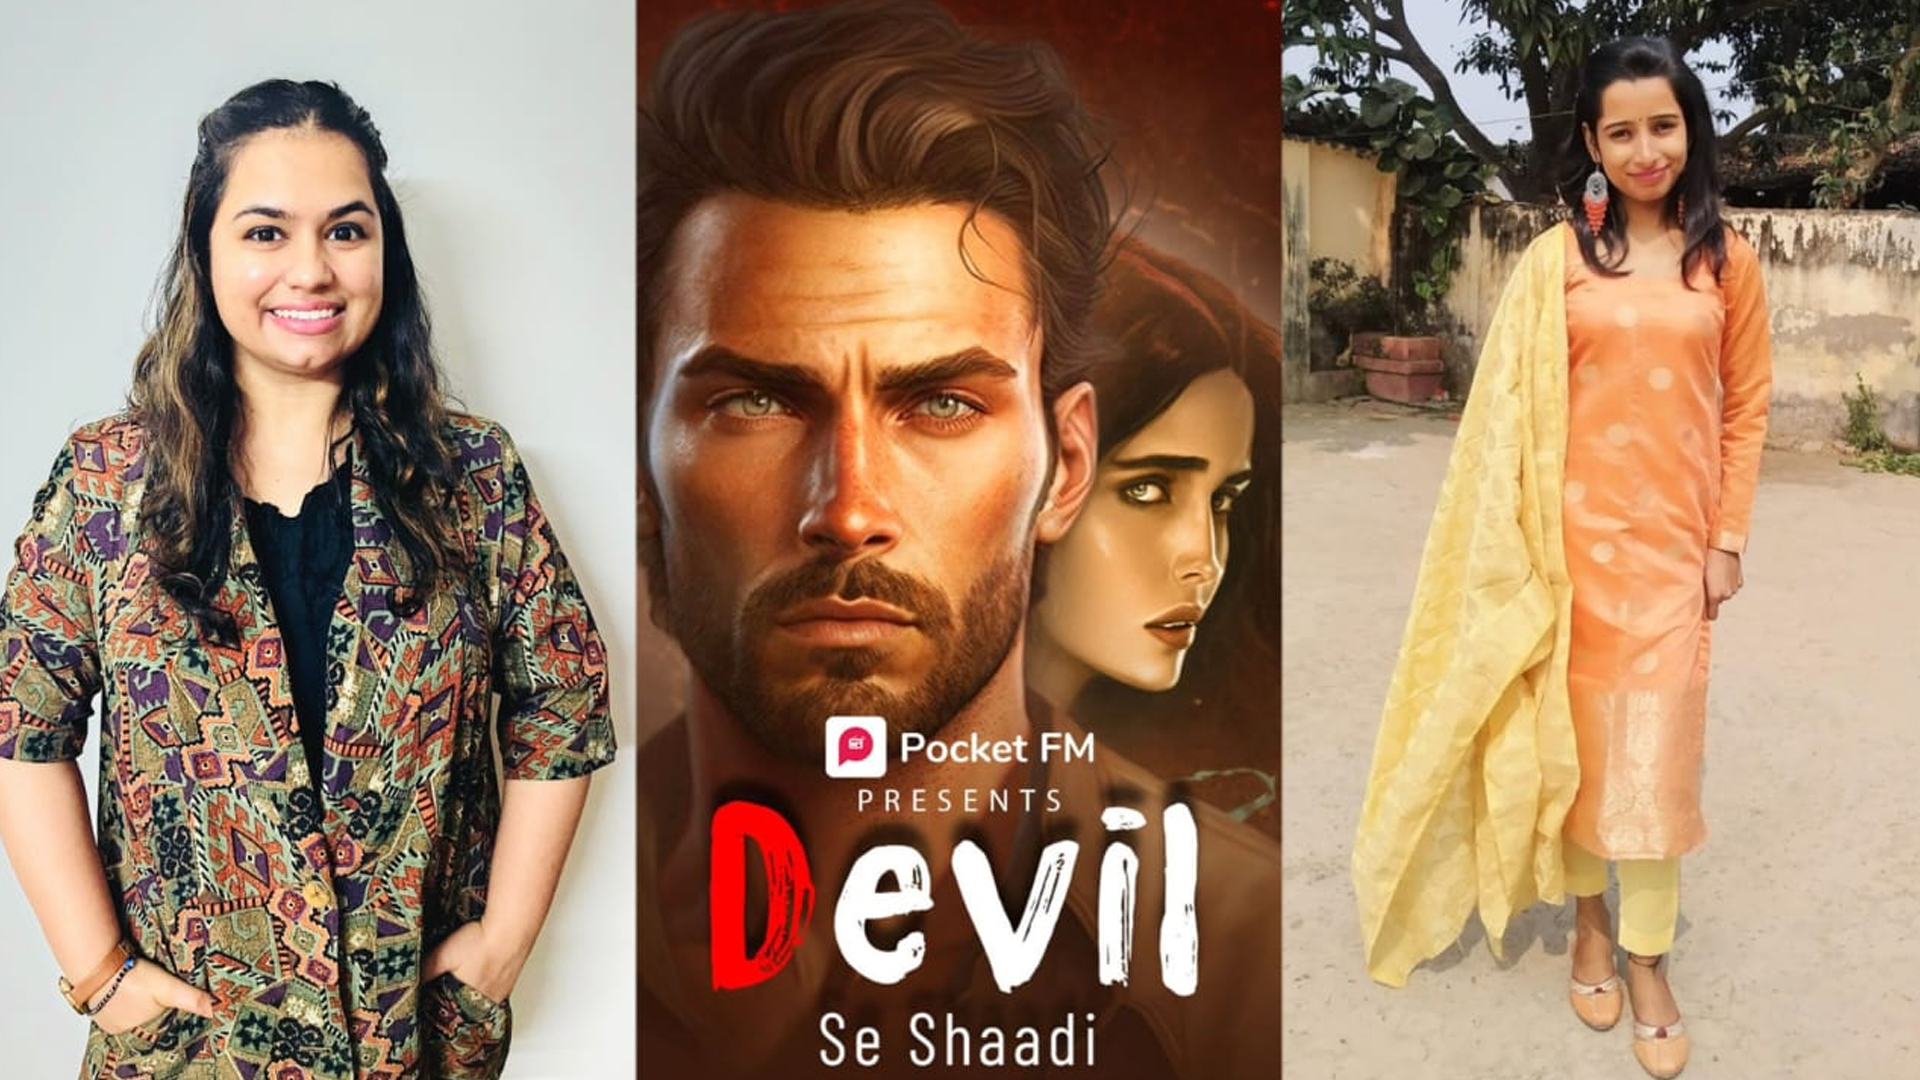 Meet the writers Moni Singh and Renuka Suthar of Pocket FM’s audio series Devil Se Shaadi, who defied all odds to create this audio series